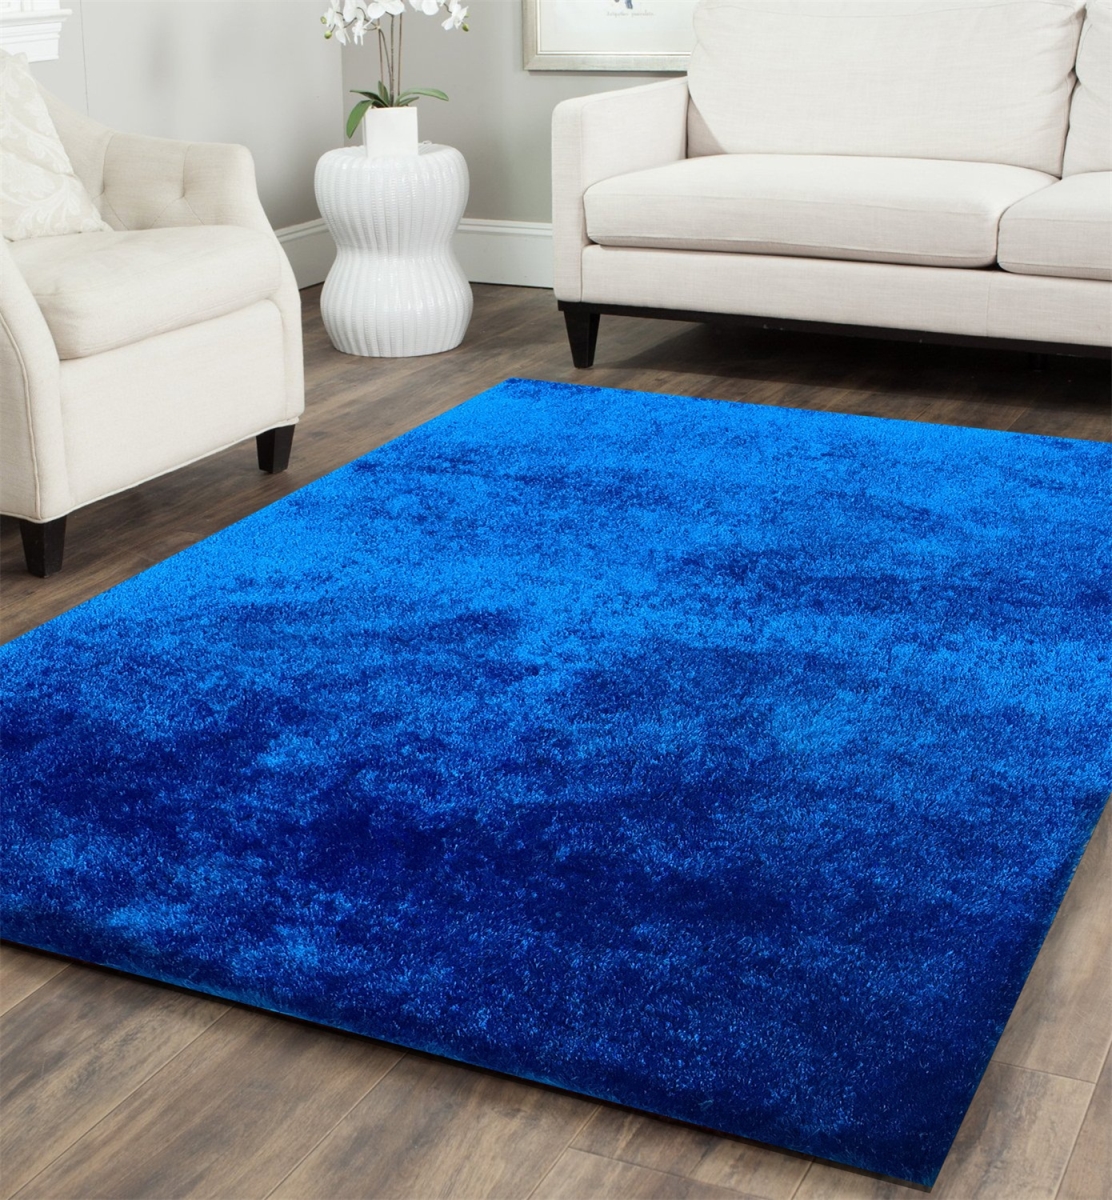 Picture of Amazing Rugs A1012-811 8 x 11 ft. Fuzzy Shaggy Hand Tufted Area Rug in Electro Blue